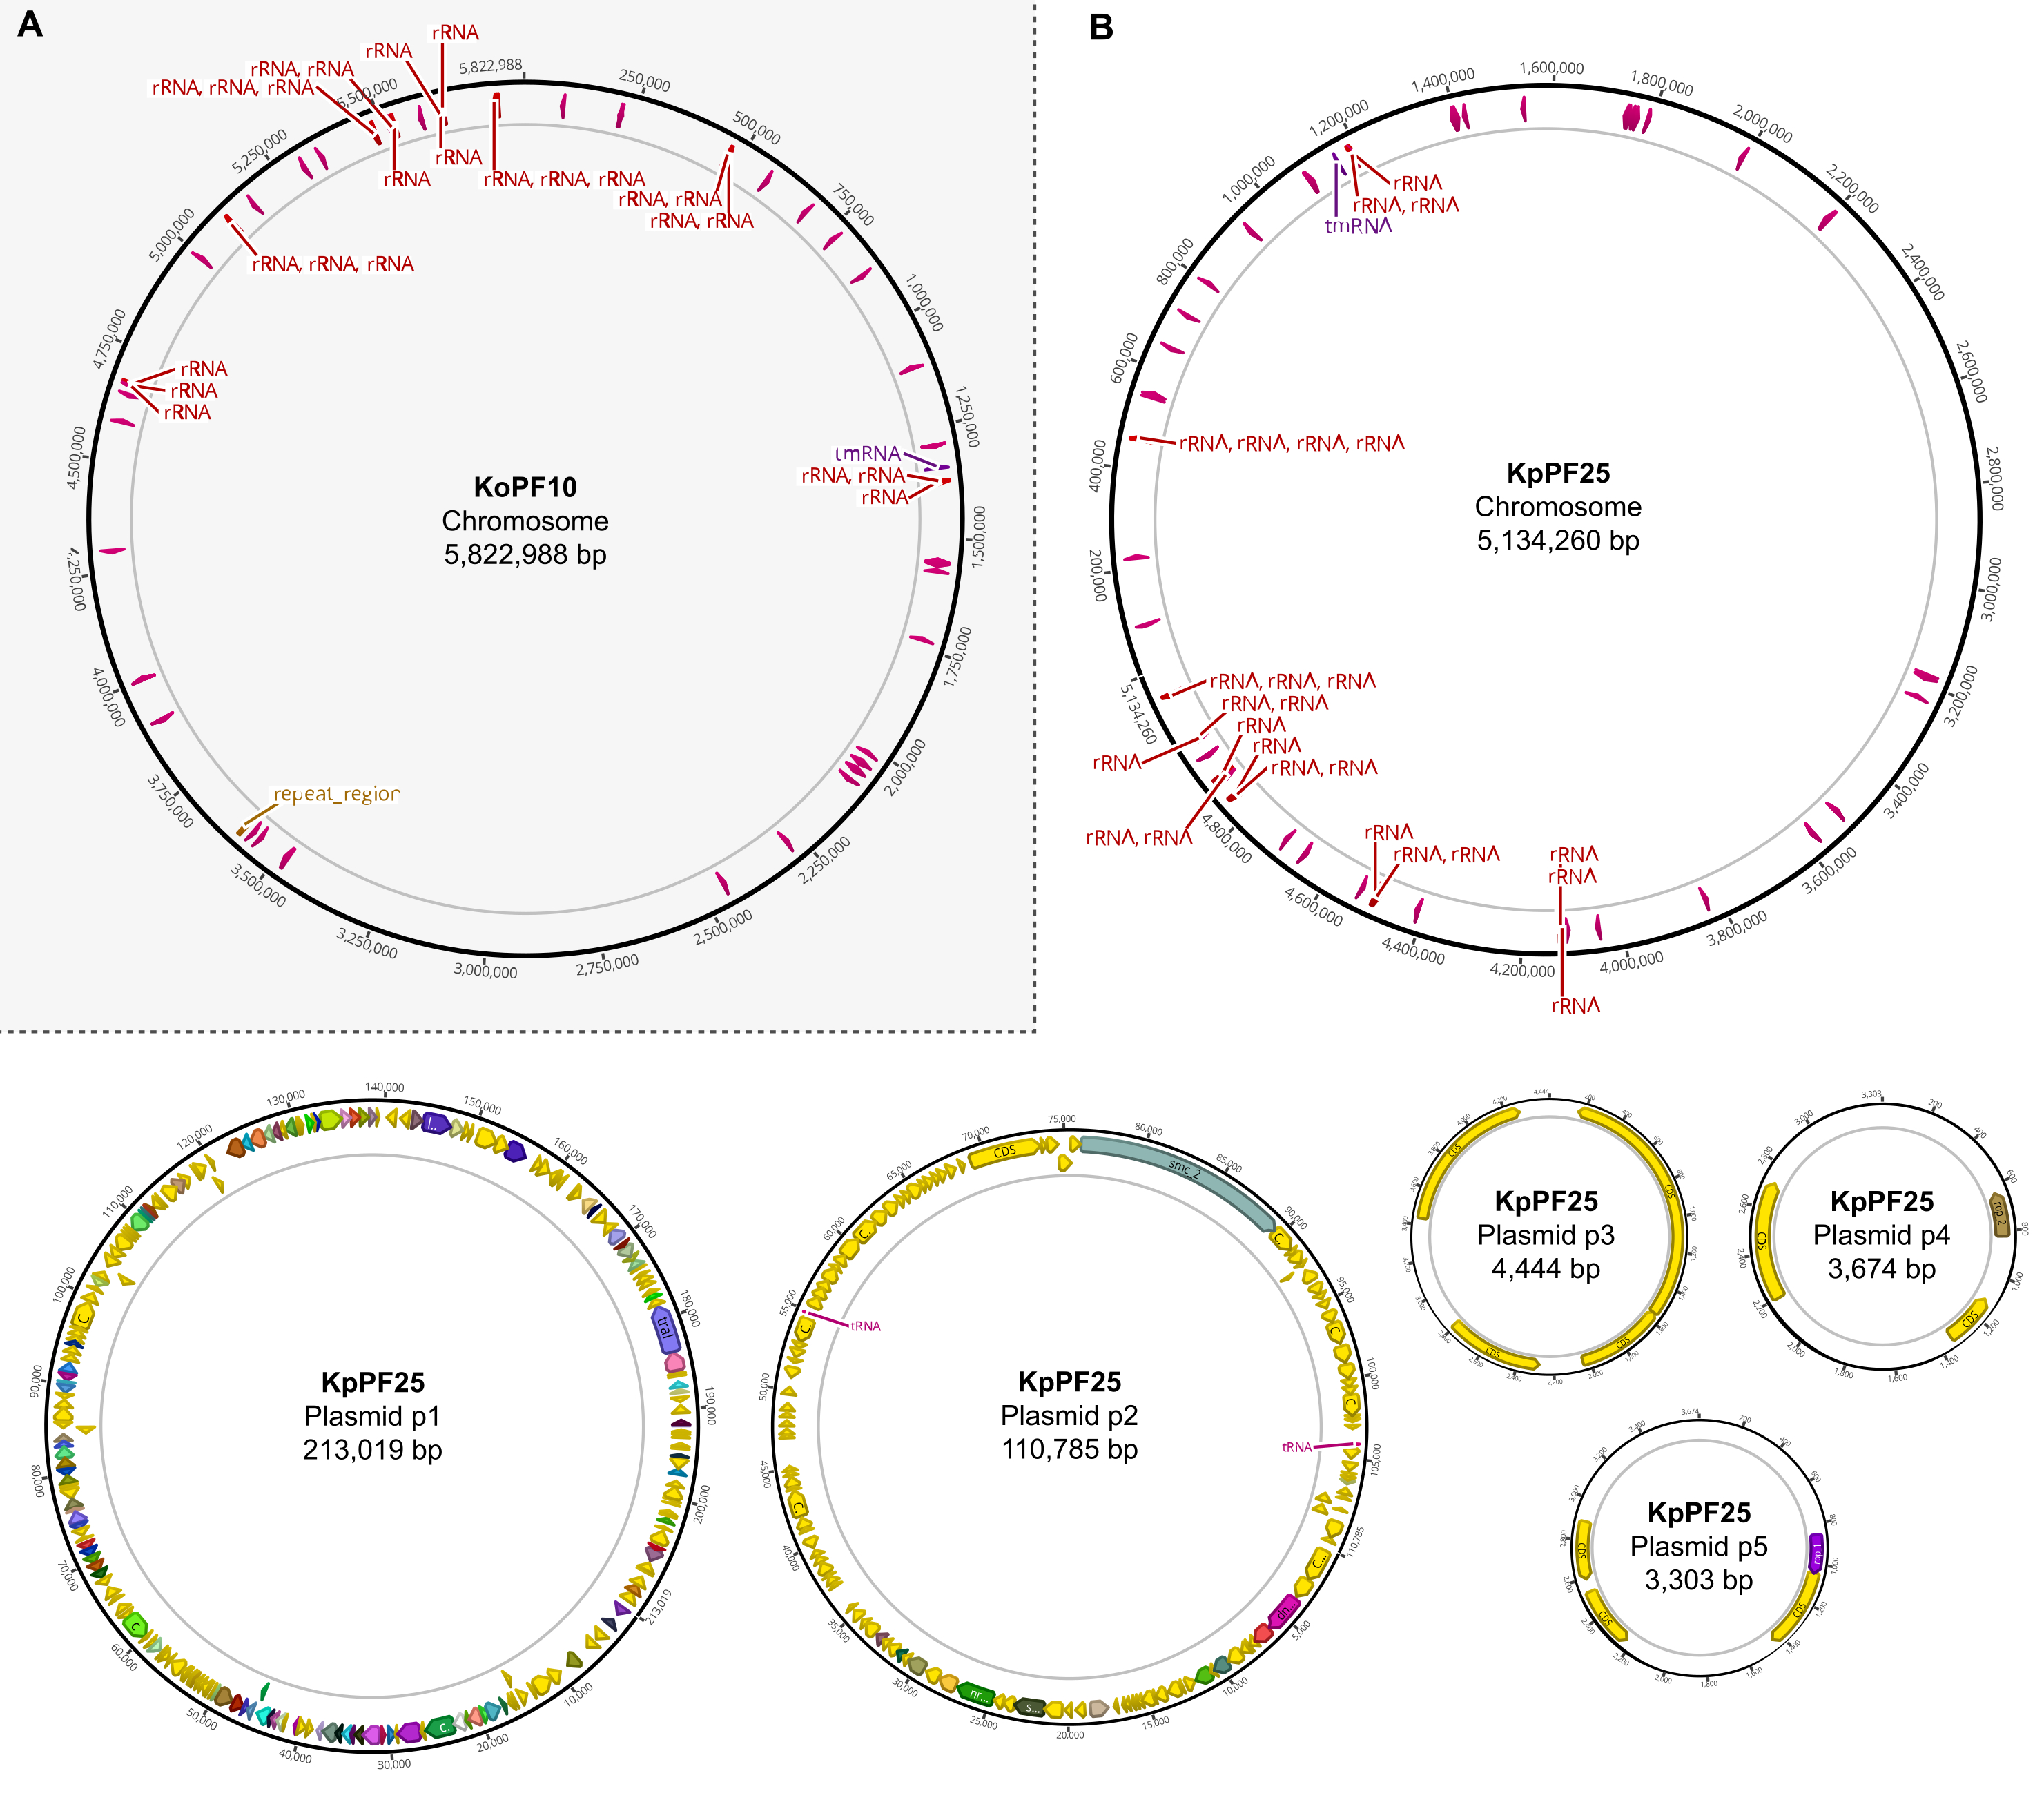 Hybrid De Novo Genome Assembly for the Generation of Complete